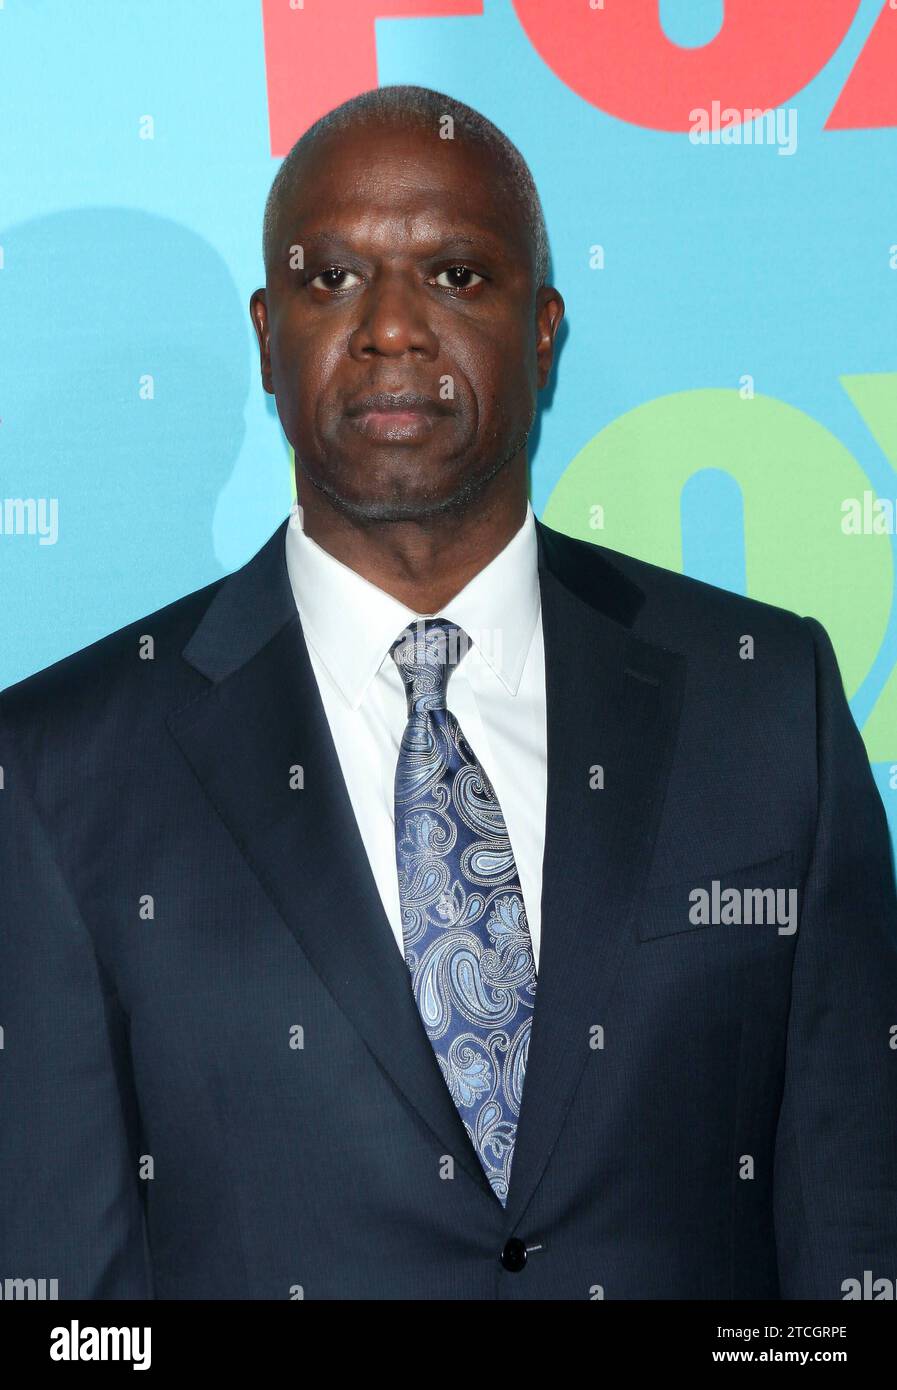 **FILE PHOTO** Andre Braugher Has Passed Away. NEW YORK - MAY 12: Andre Braugher attends the 2014 FOX Programming Presentation FanFront red carpet arrivals on Amsterdam Avenue on May 12, 2014 in New York City. Corredor/PG/MediaPunch Copyright: x2014xPicturegroupx Stock Photo